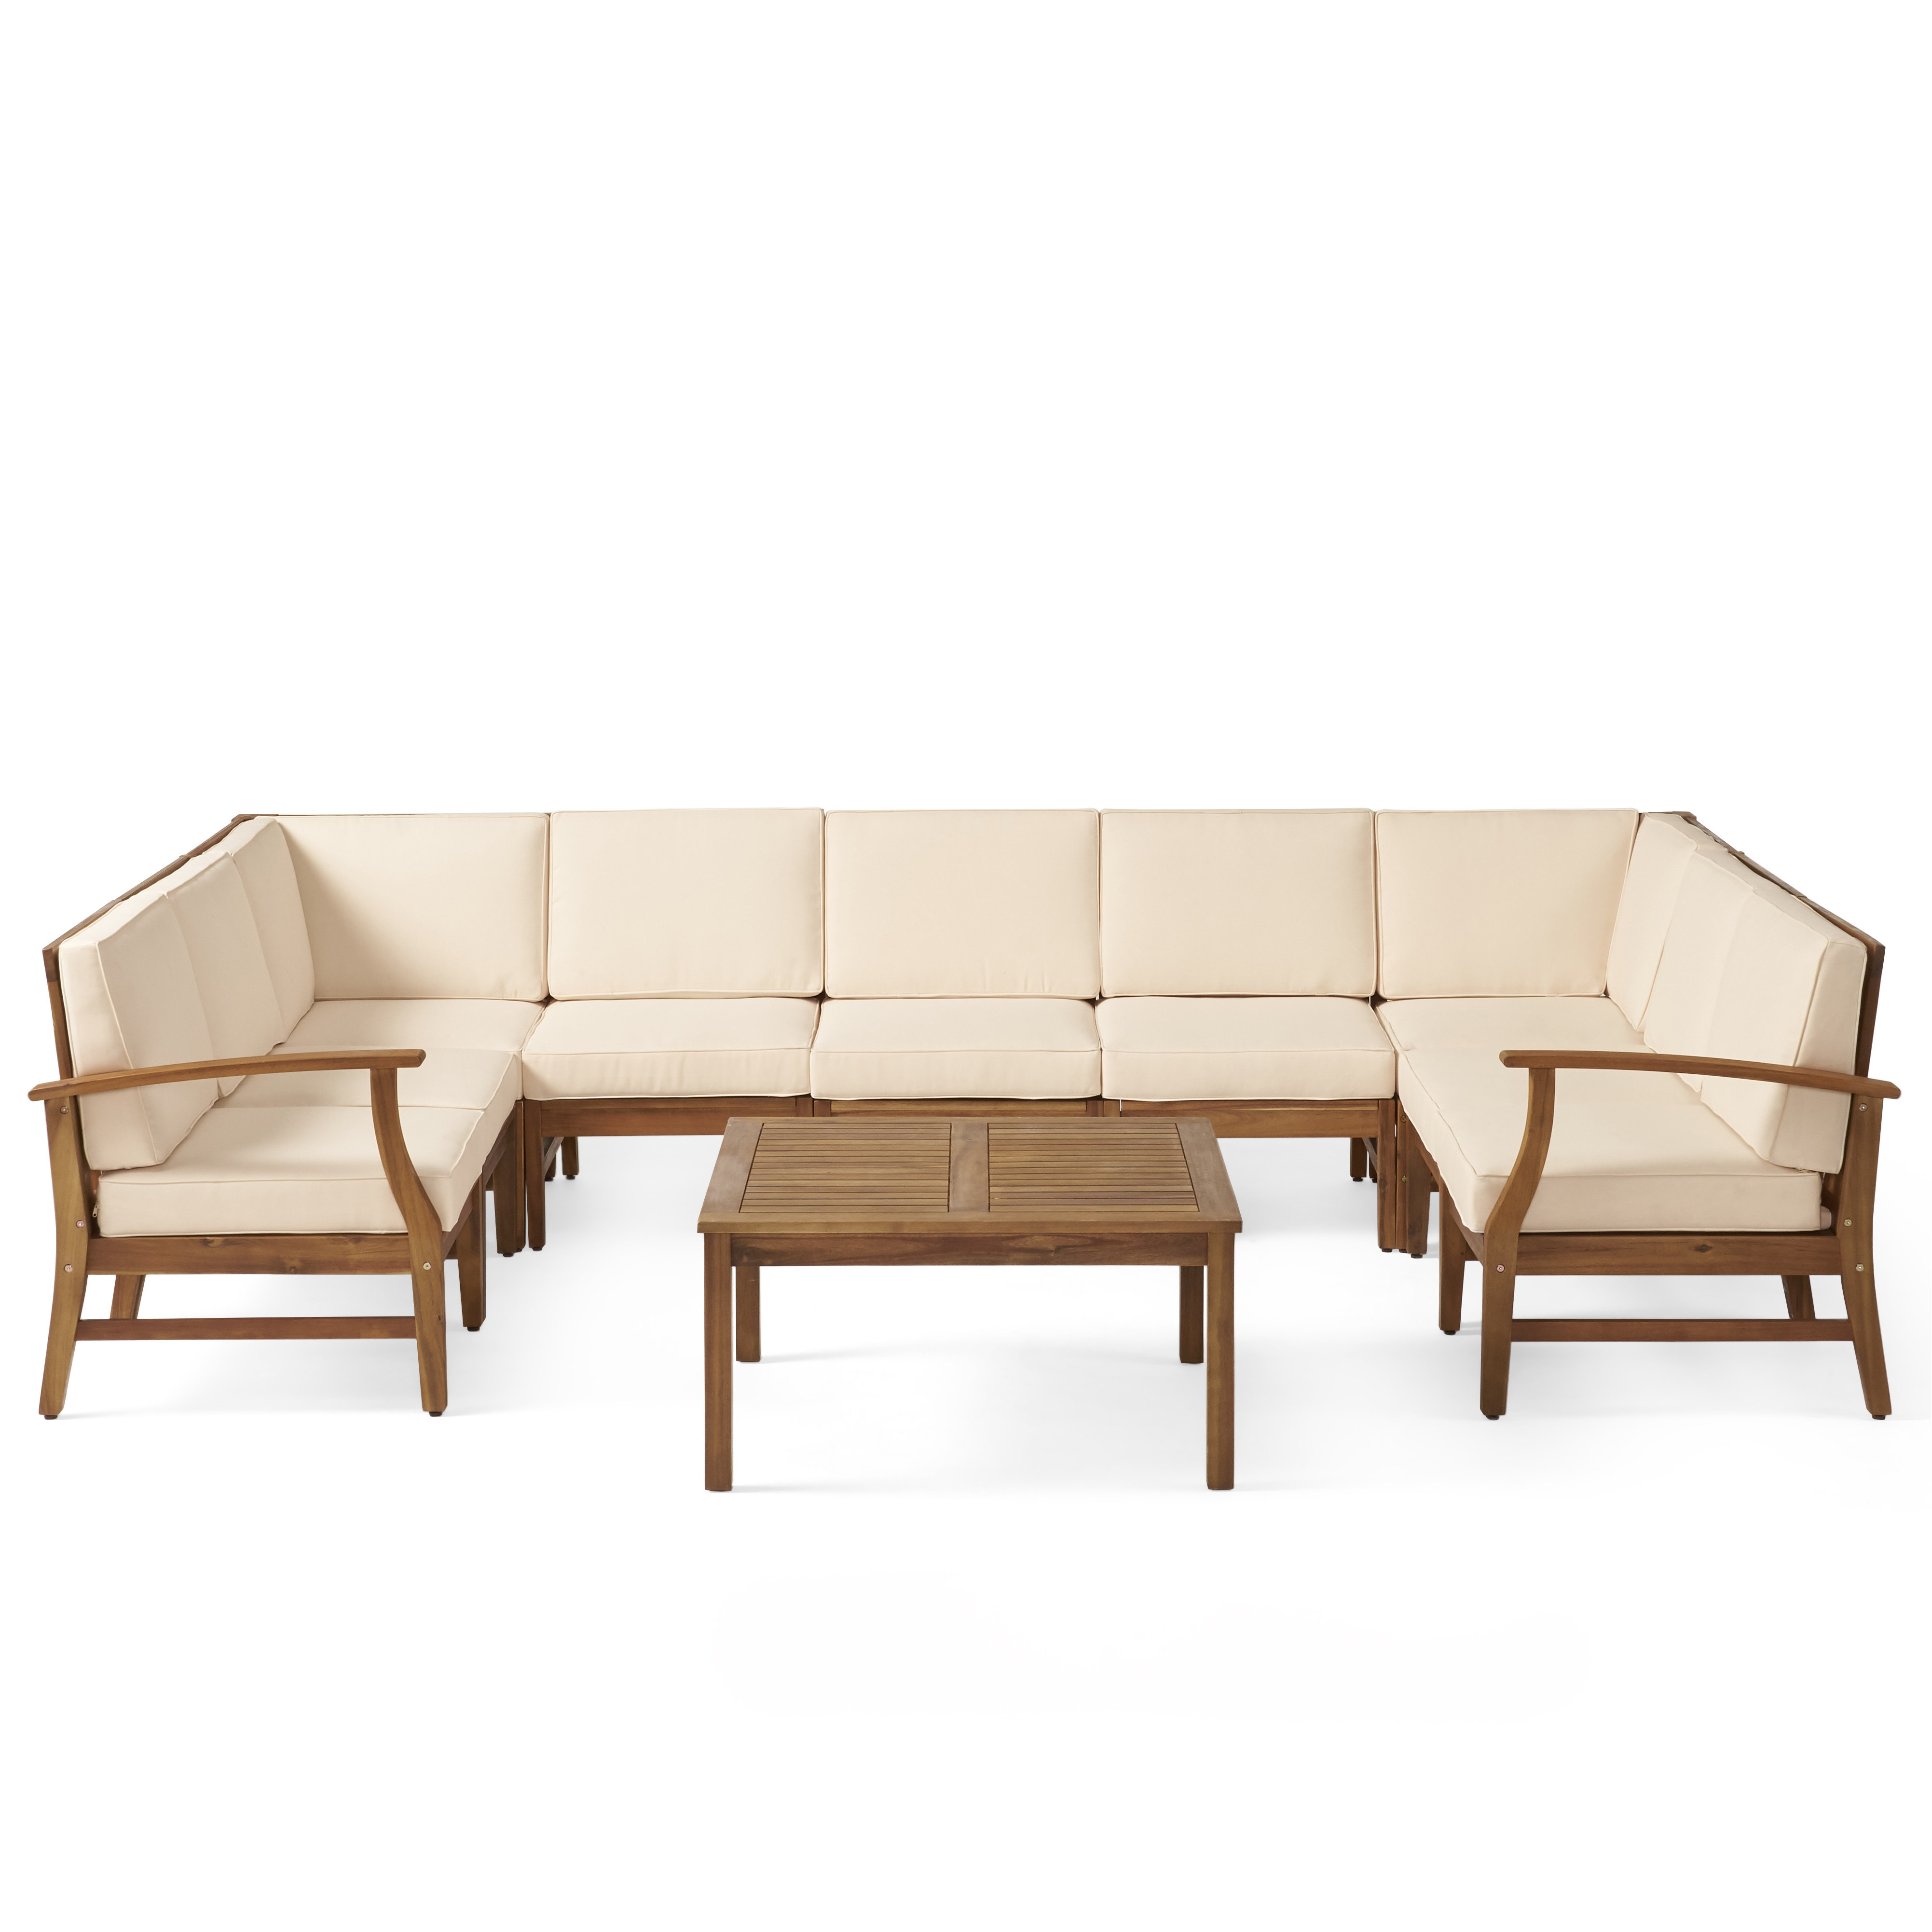 Judith Outdoor 9 Seater Acacia Wood Sectional Sofa Set With Cushions - Blue Cushion